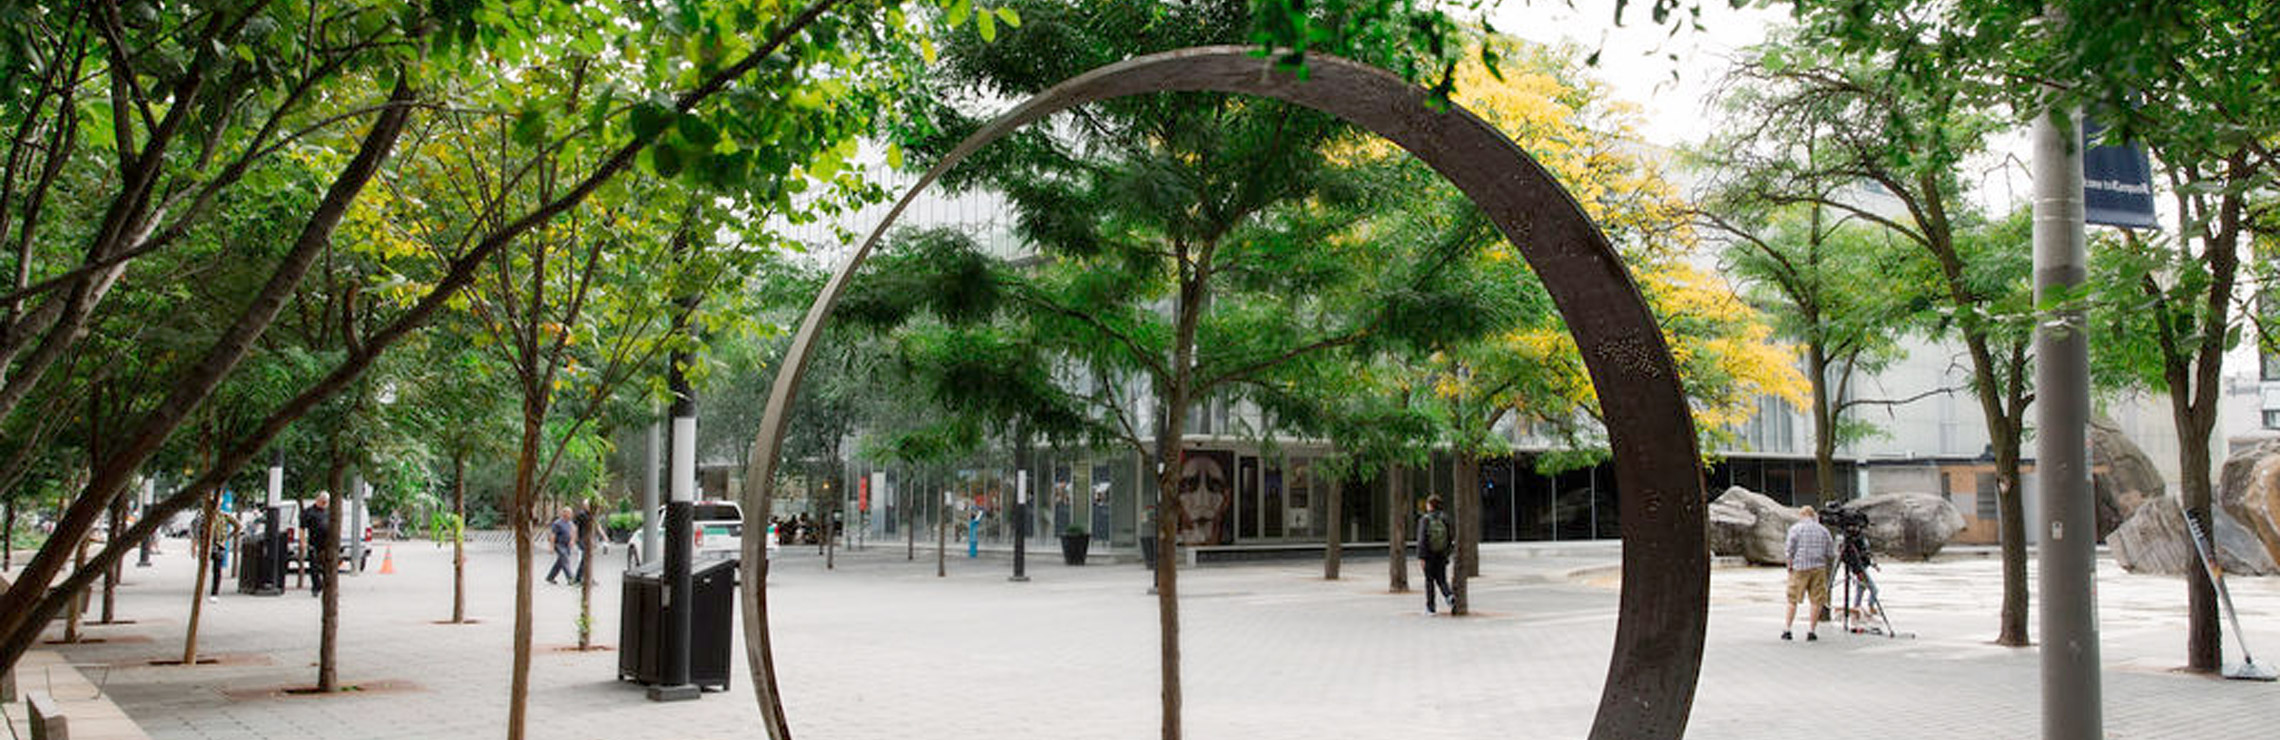 The Ring invites campus visitors to interact with it in its prominent location.